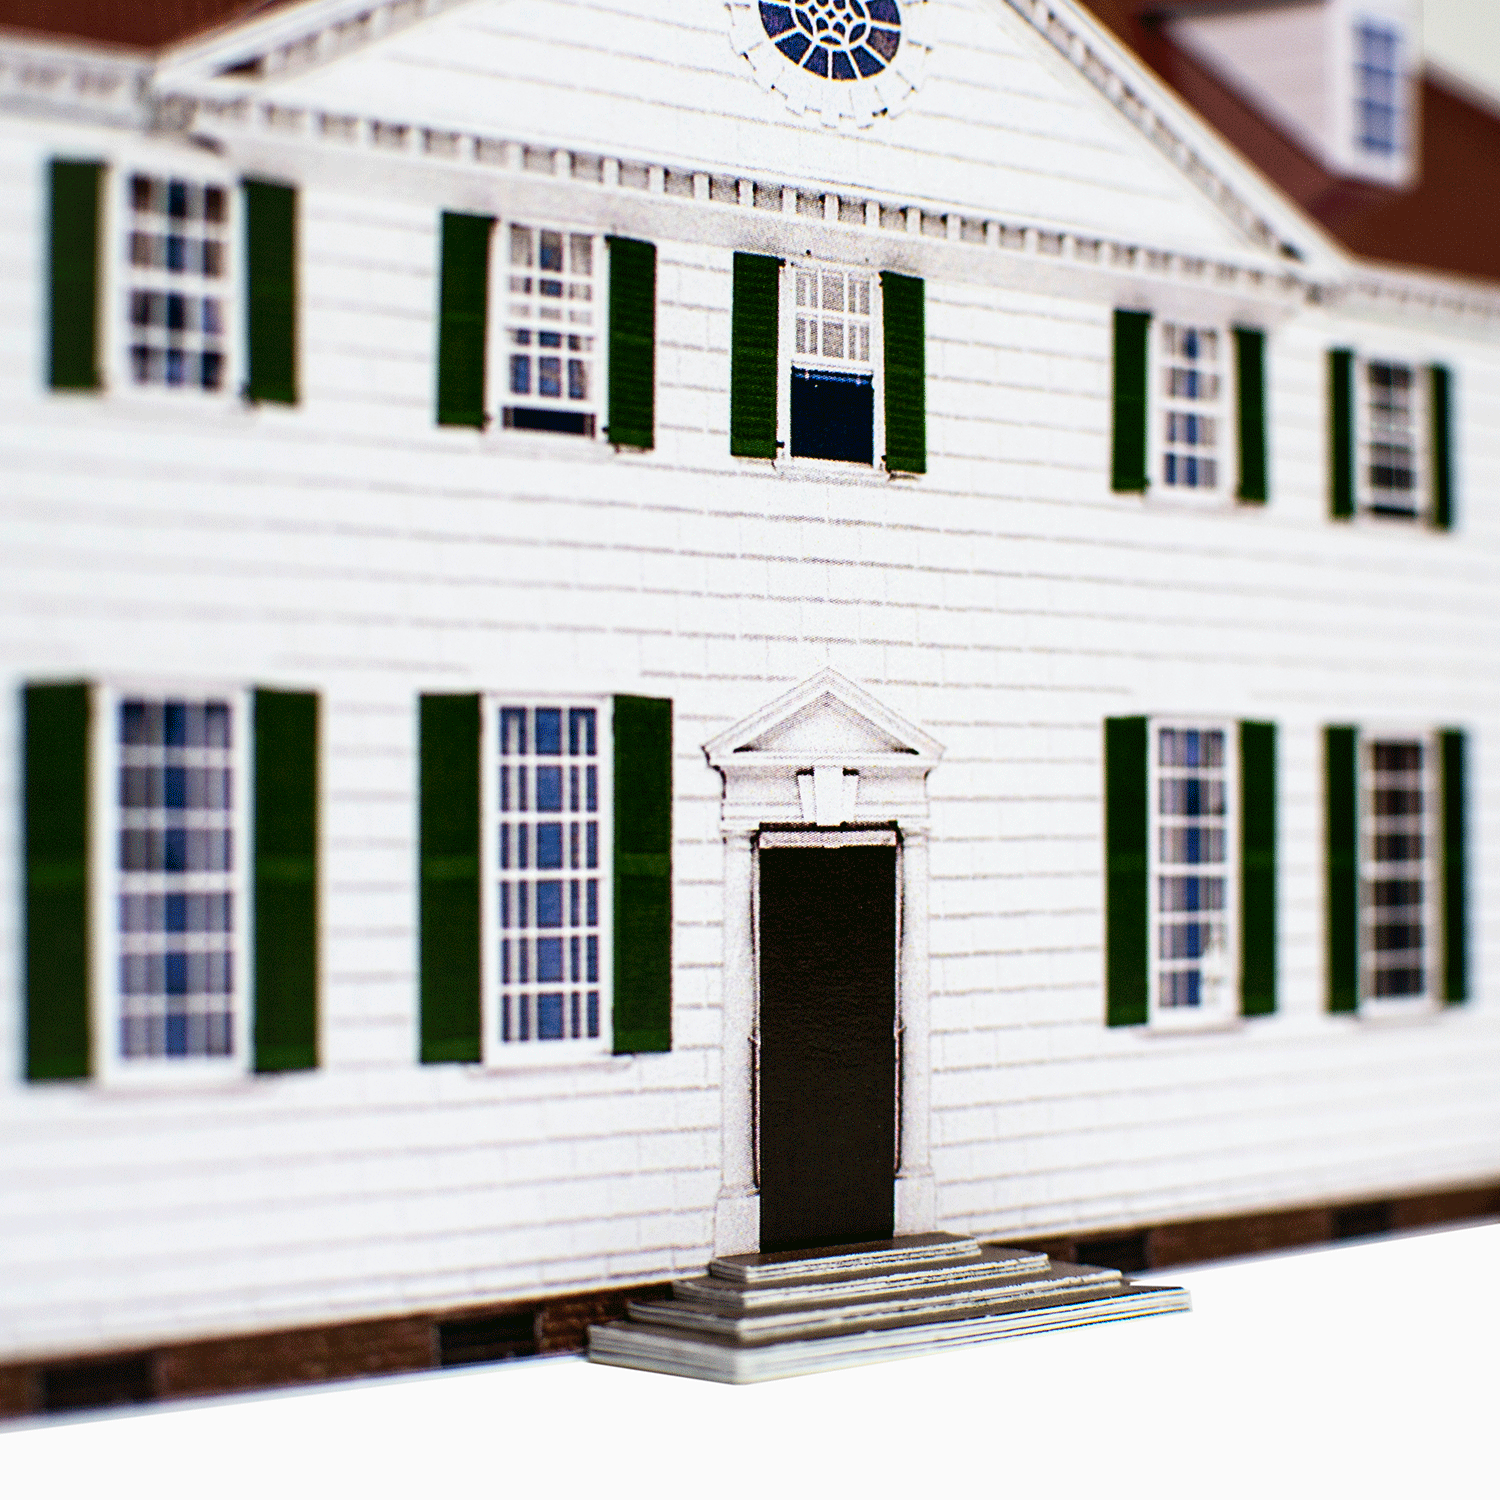 Historic Wood Pen_ The Shops at Mount Vernon